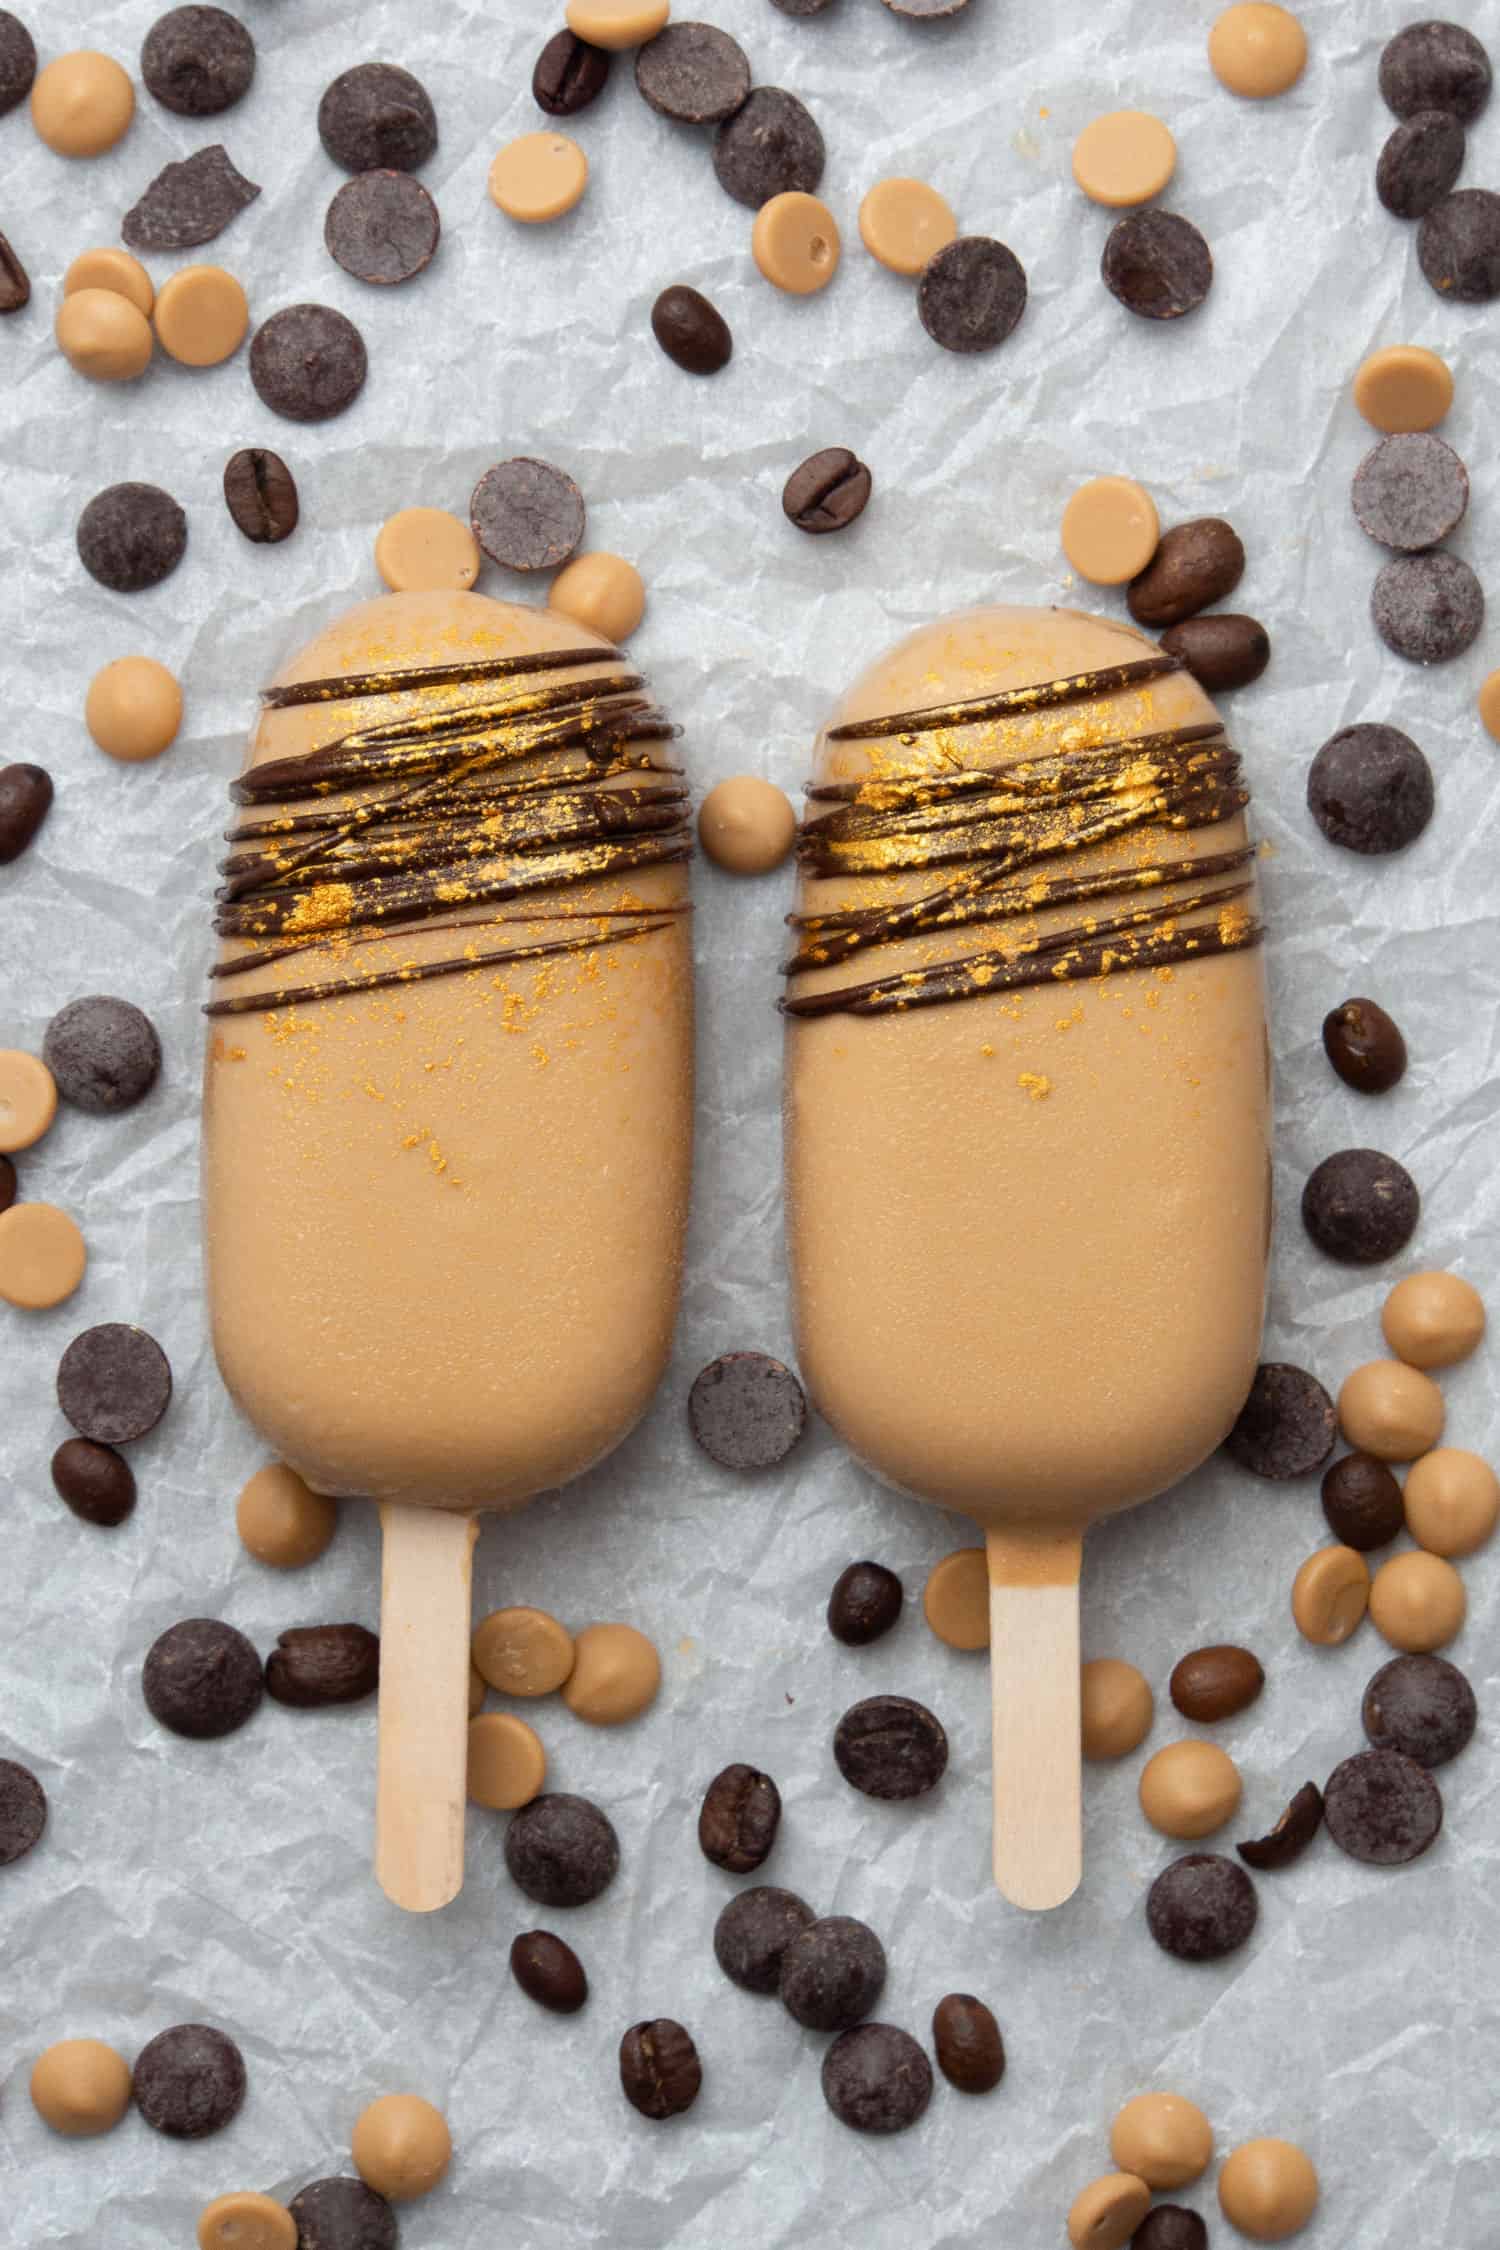 2 pcs of Coffee caramel ice cream bar on a white baking paper.